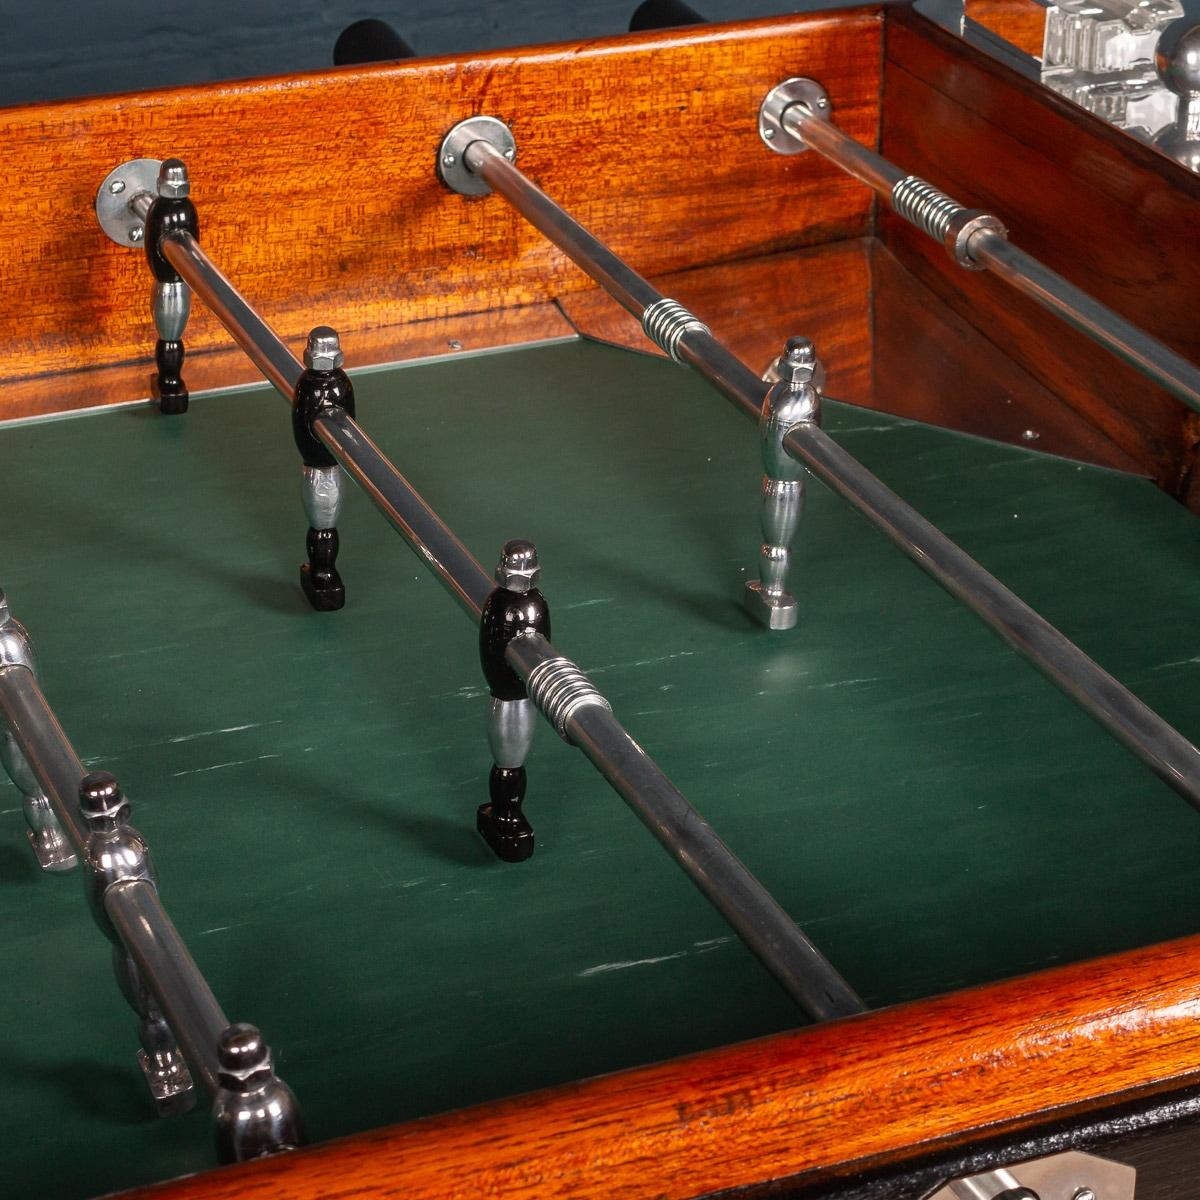 Stunning Mid-20th Century French Table Football Game 6